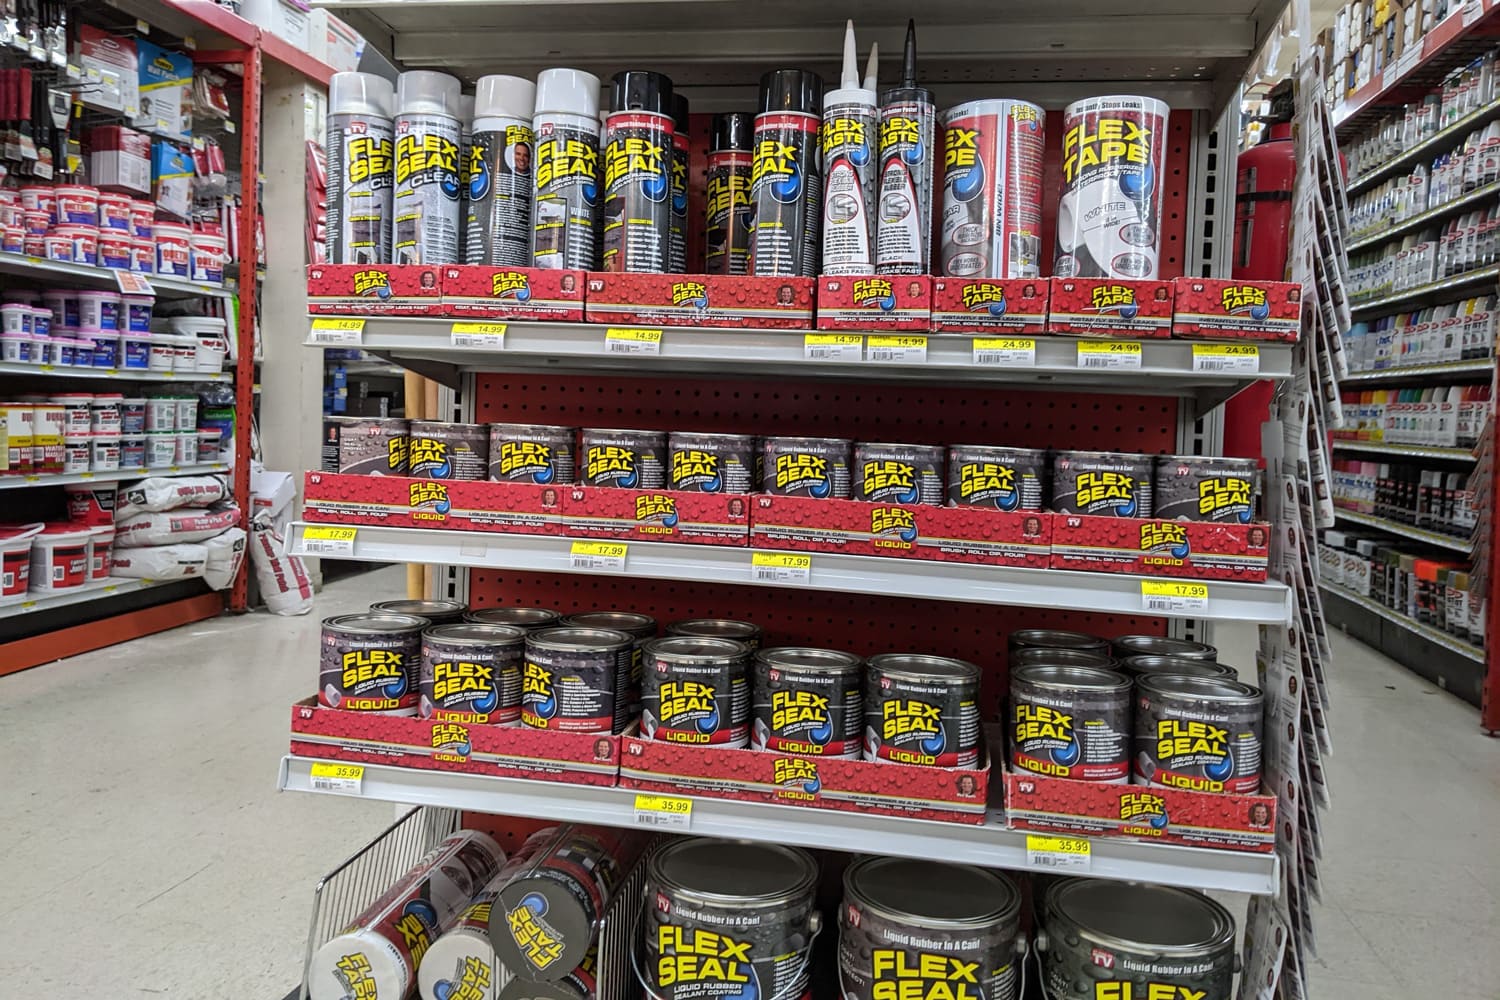  View of a Flex Seal and Flex Tape endcap inside a McLendon Hardware Store.